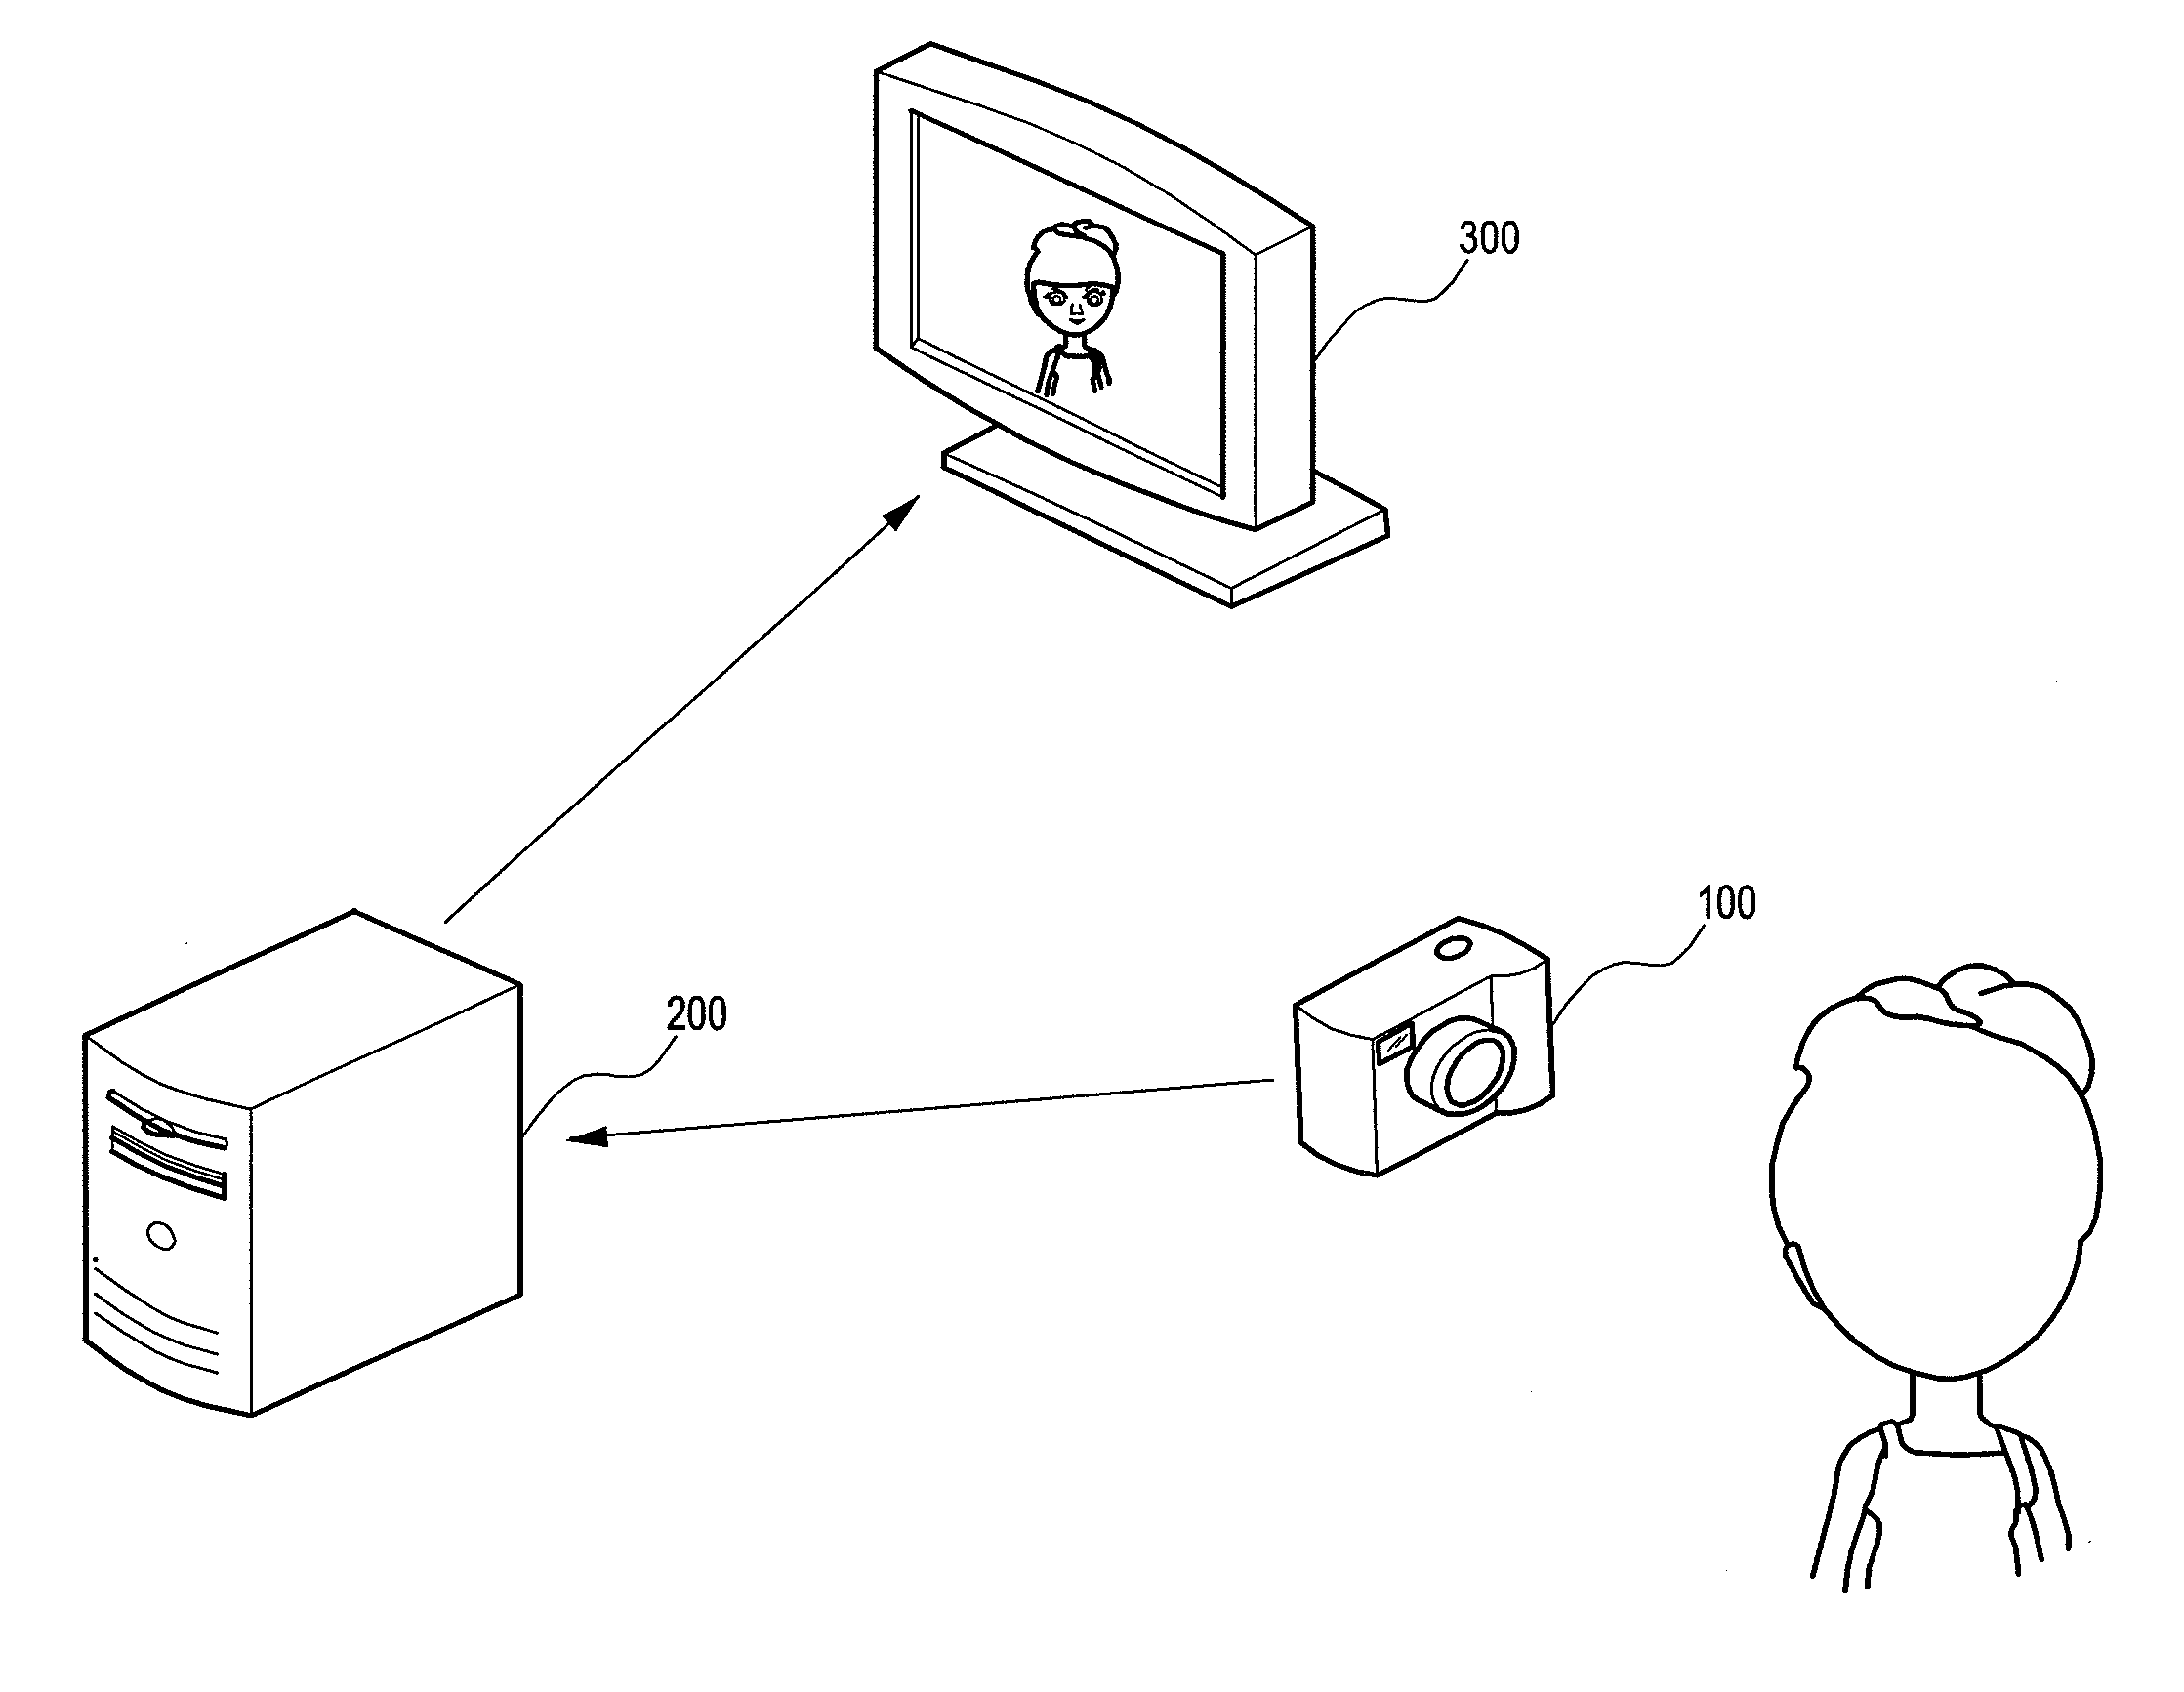 System, device, method, and computer program product for facial defect analysis using angular facial image